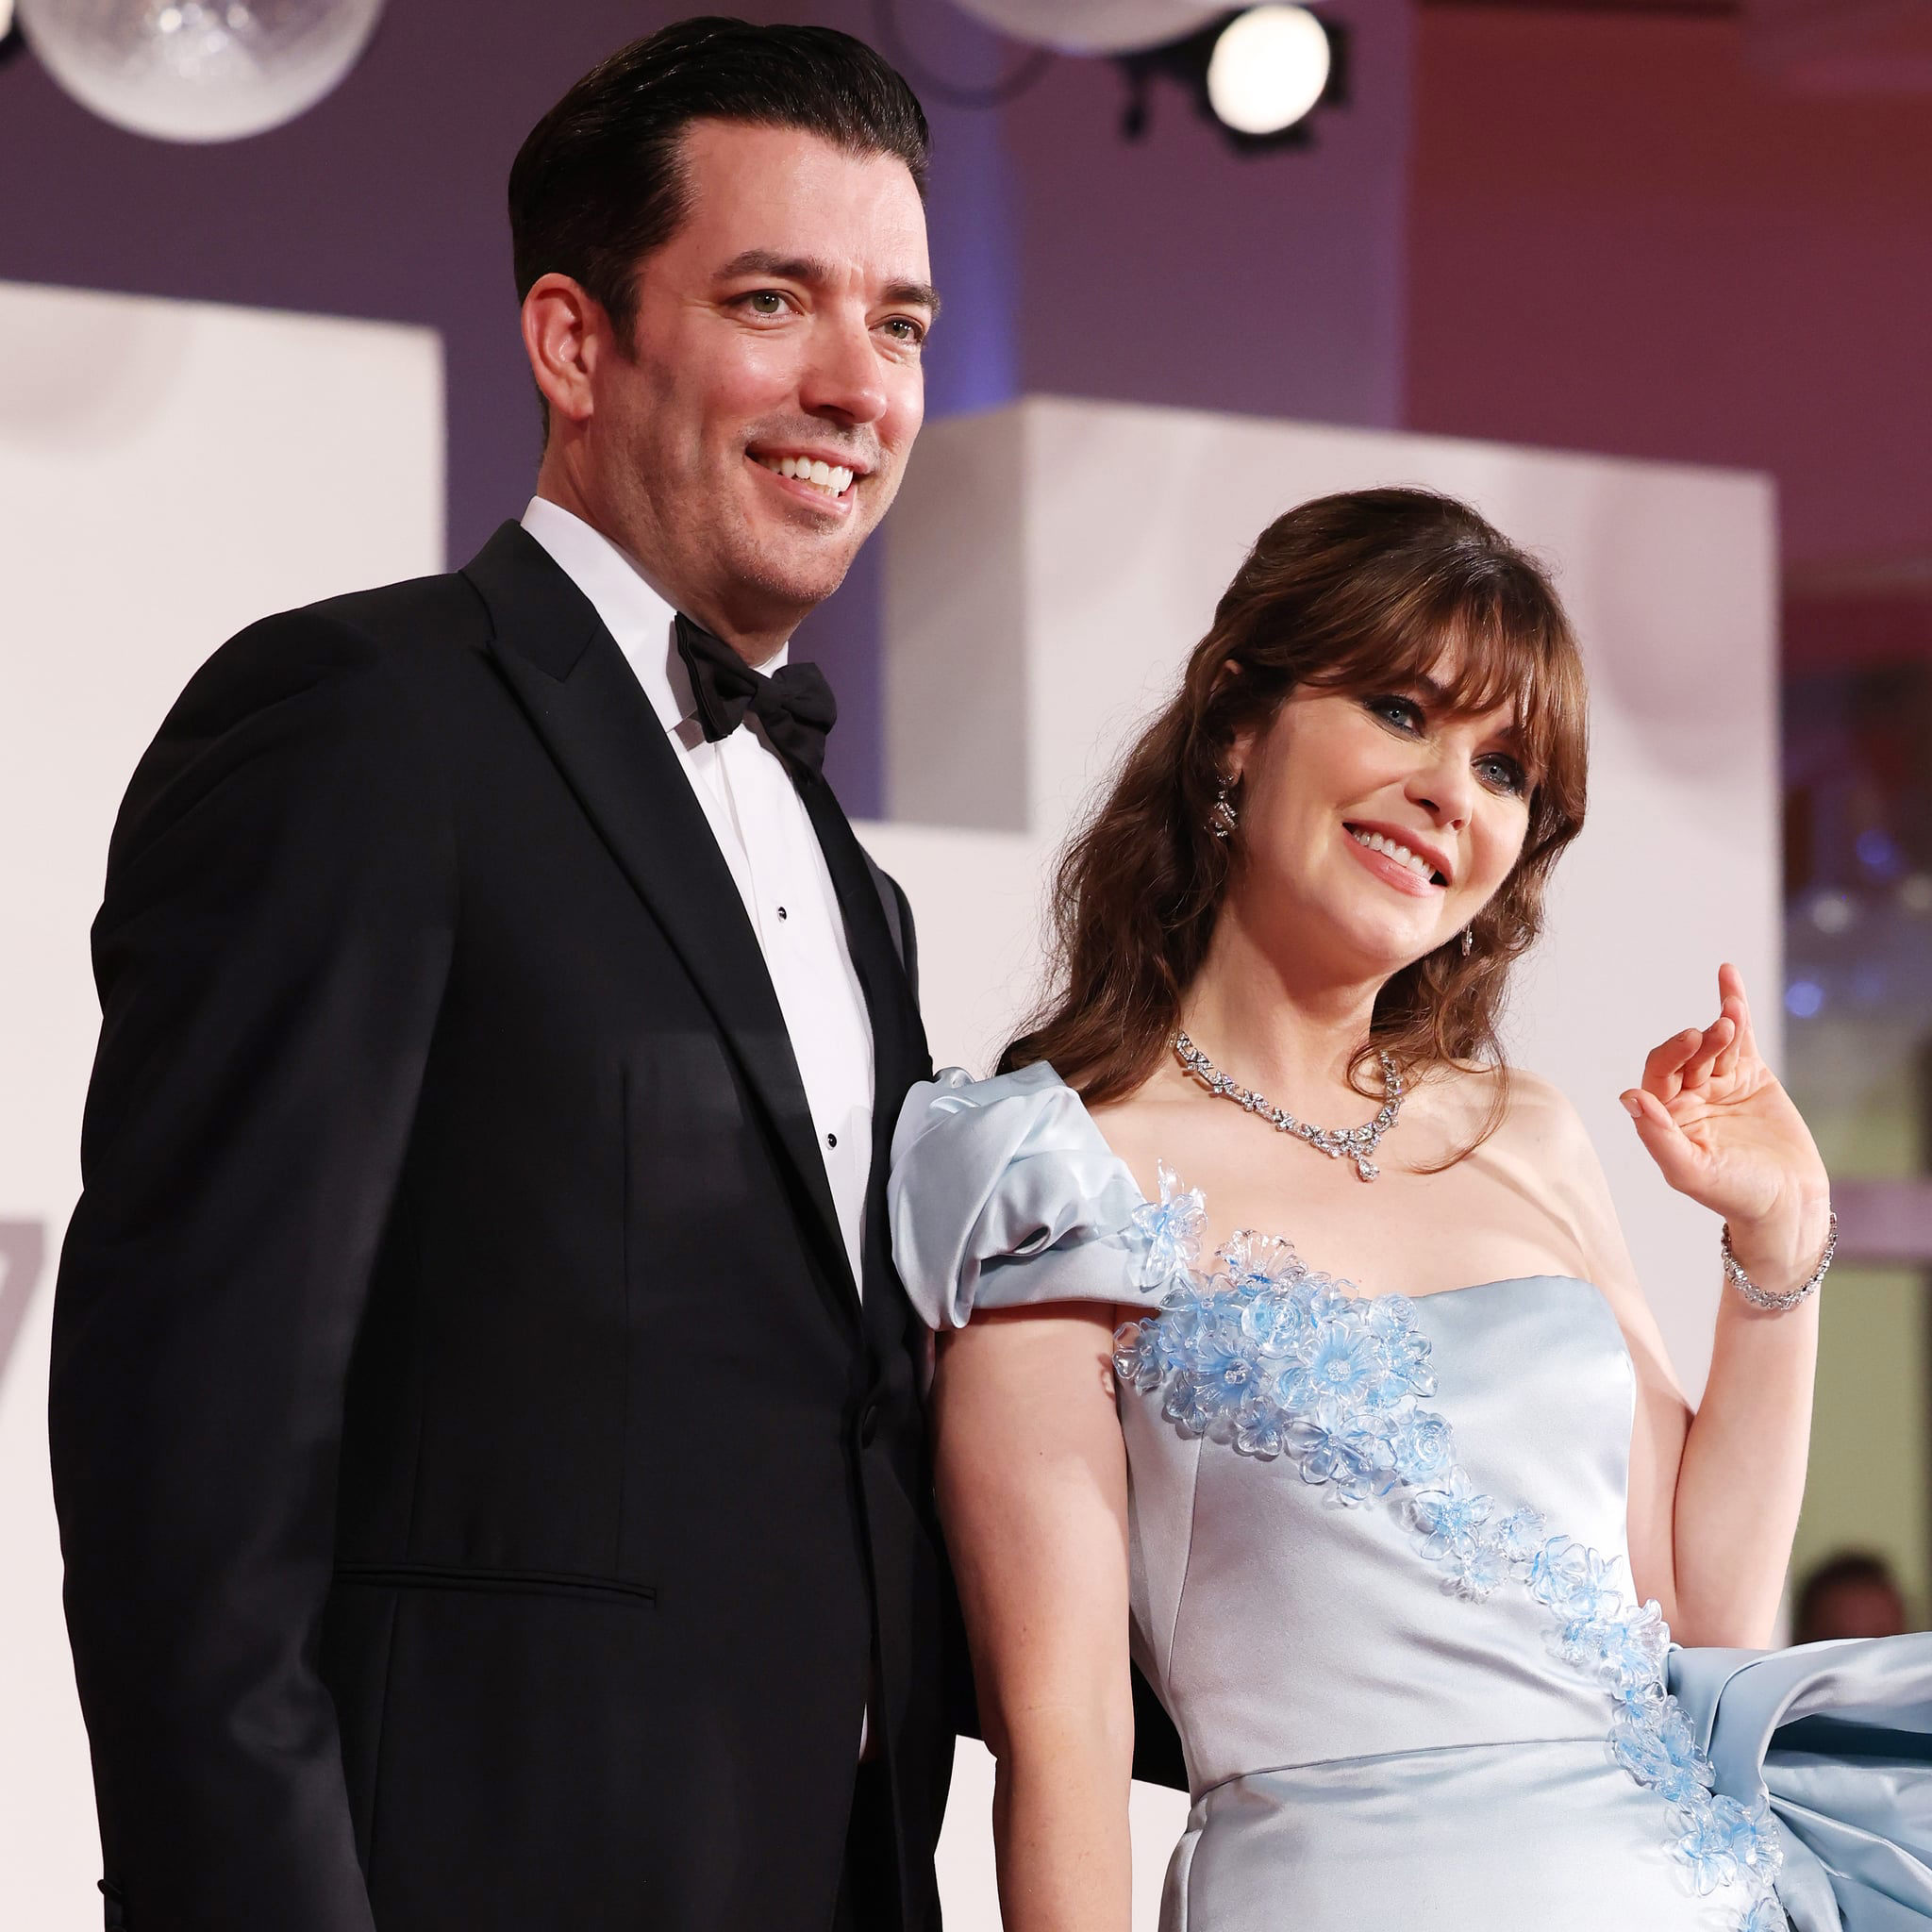 Zooey Deschanel's Floral Engagement Ring Is One of a Kind